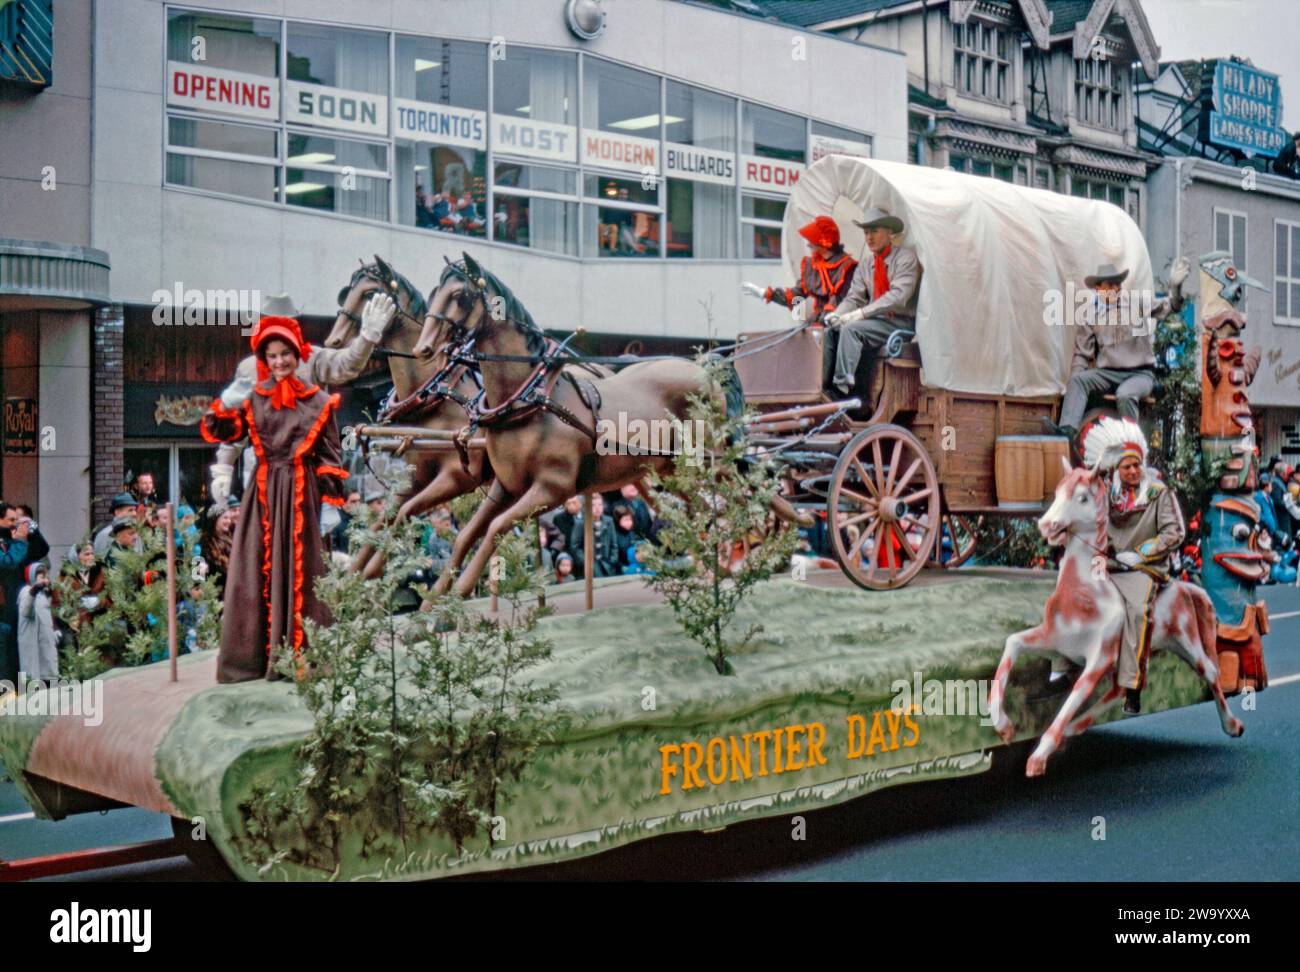 A parade float taking part in Eaton's Santa Claus Parade on Yonge Street, Toronto, Ontario, Canada, November 17, 1962. This float, ‘Frontier Days’, features a wagon and horses, an indigenous native American on horseback and a totem pole. Attracting large crowds, the annual Toronto Santa Claus Parade (also known as The Original Santa Claus Parade) was first held in 1905 and is one of the largest in North America and the oldest Santa Claus parade in the world. It used to terminate at the downtown Eaton's store (later the Eaton Centre) at Yonge Street and Queen Street. Stock Photo